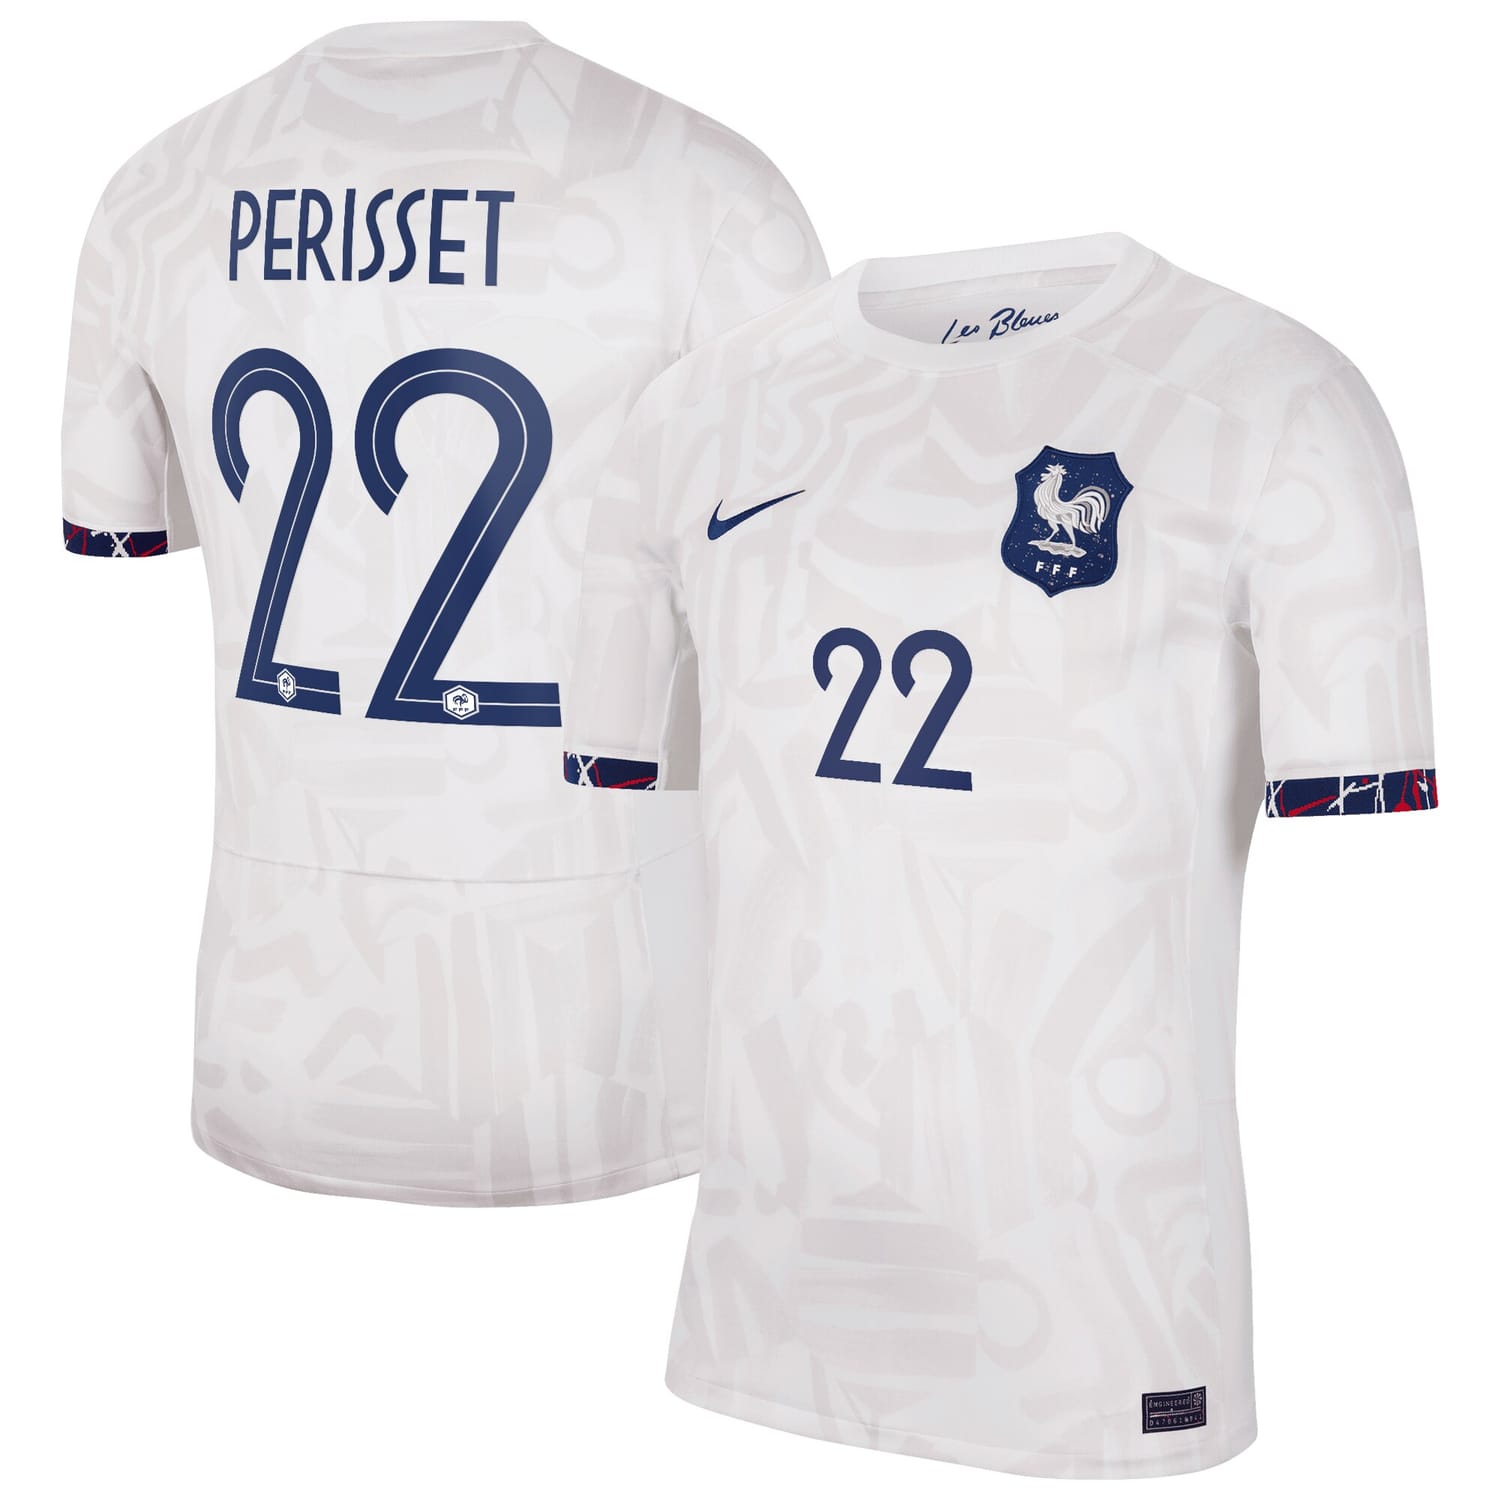 France National Team Away Jersey Shirt 2023-24 player Eve Perisset 22 printing for Men